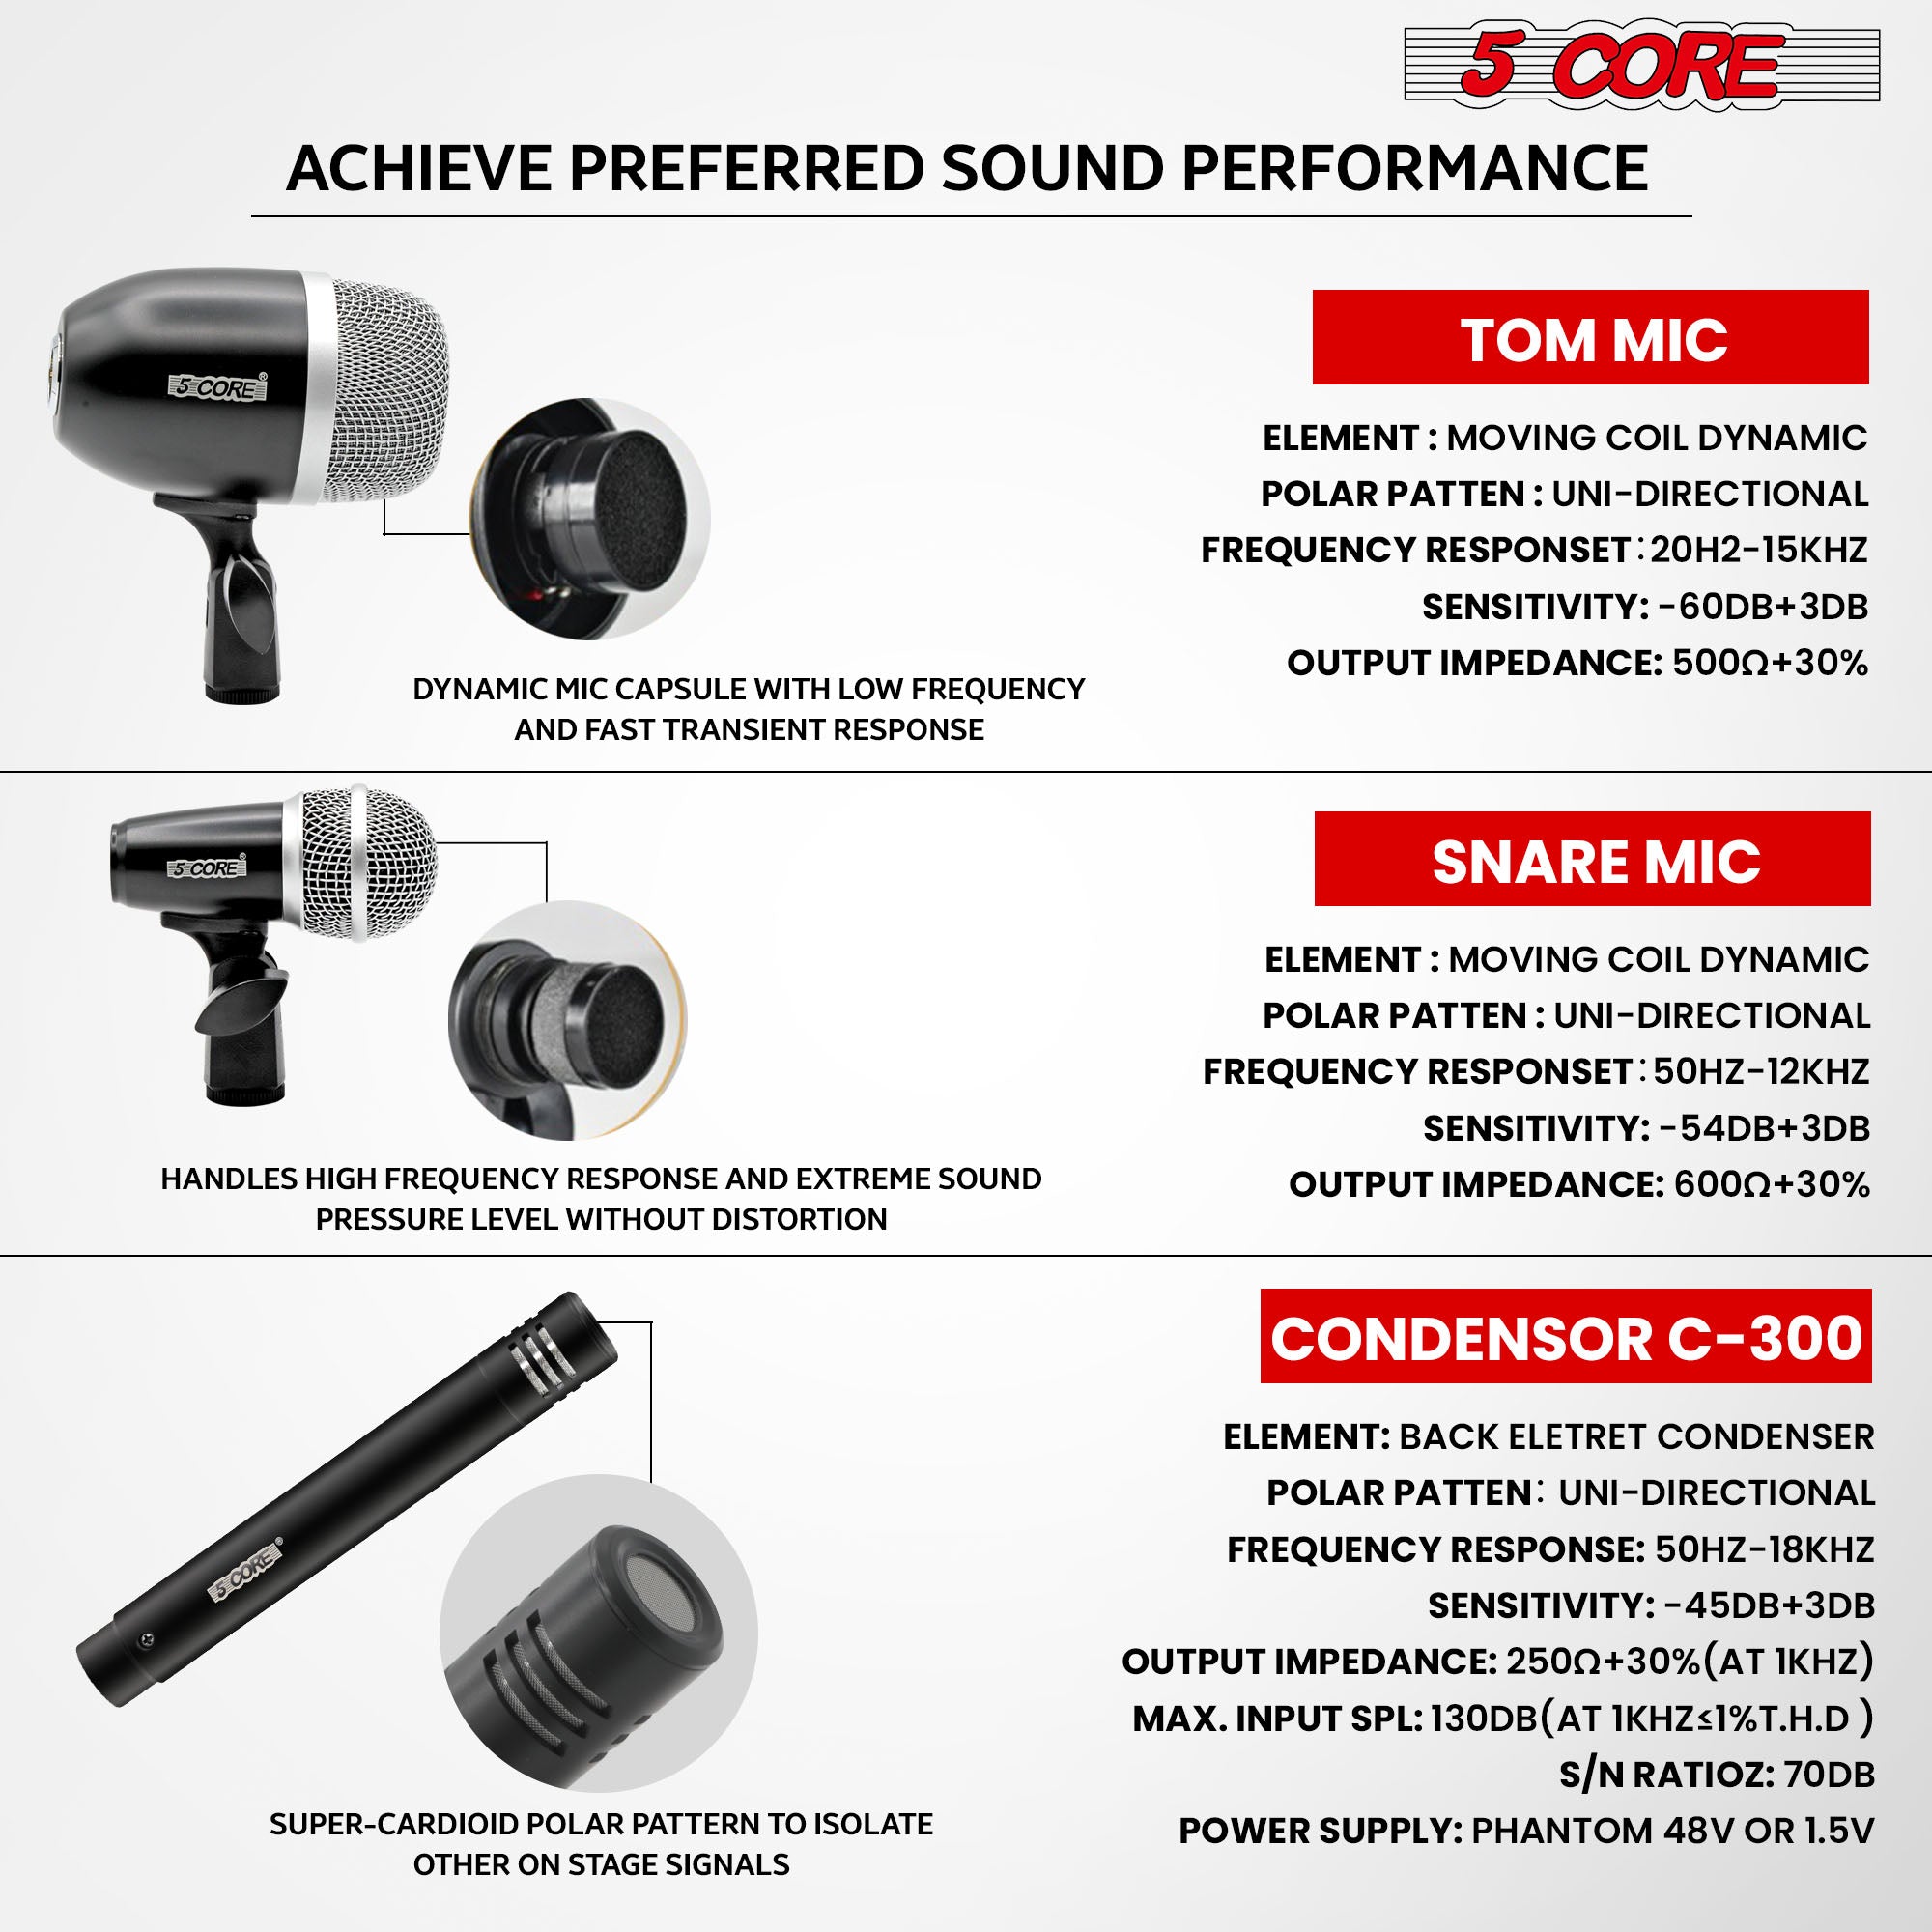 5 Core congo Dynamic Microphone Set is designed to handle high-pressure levels without compromising audio quality.